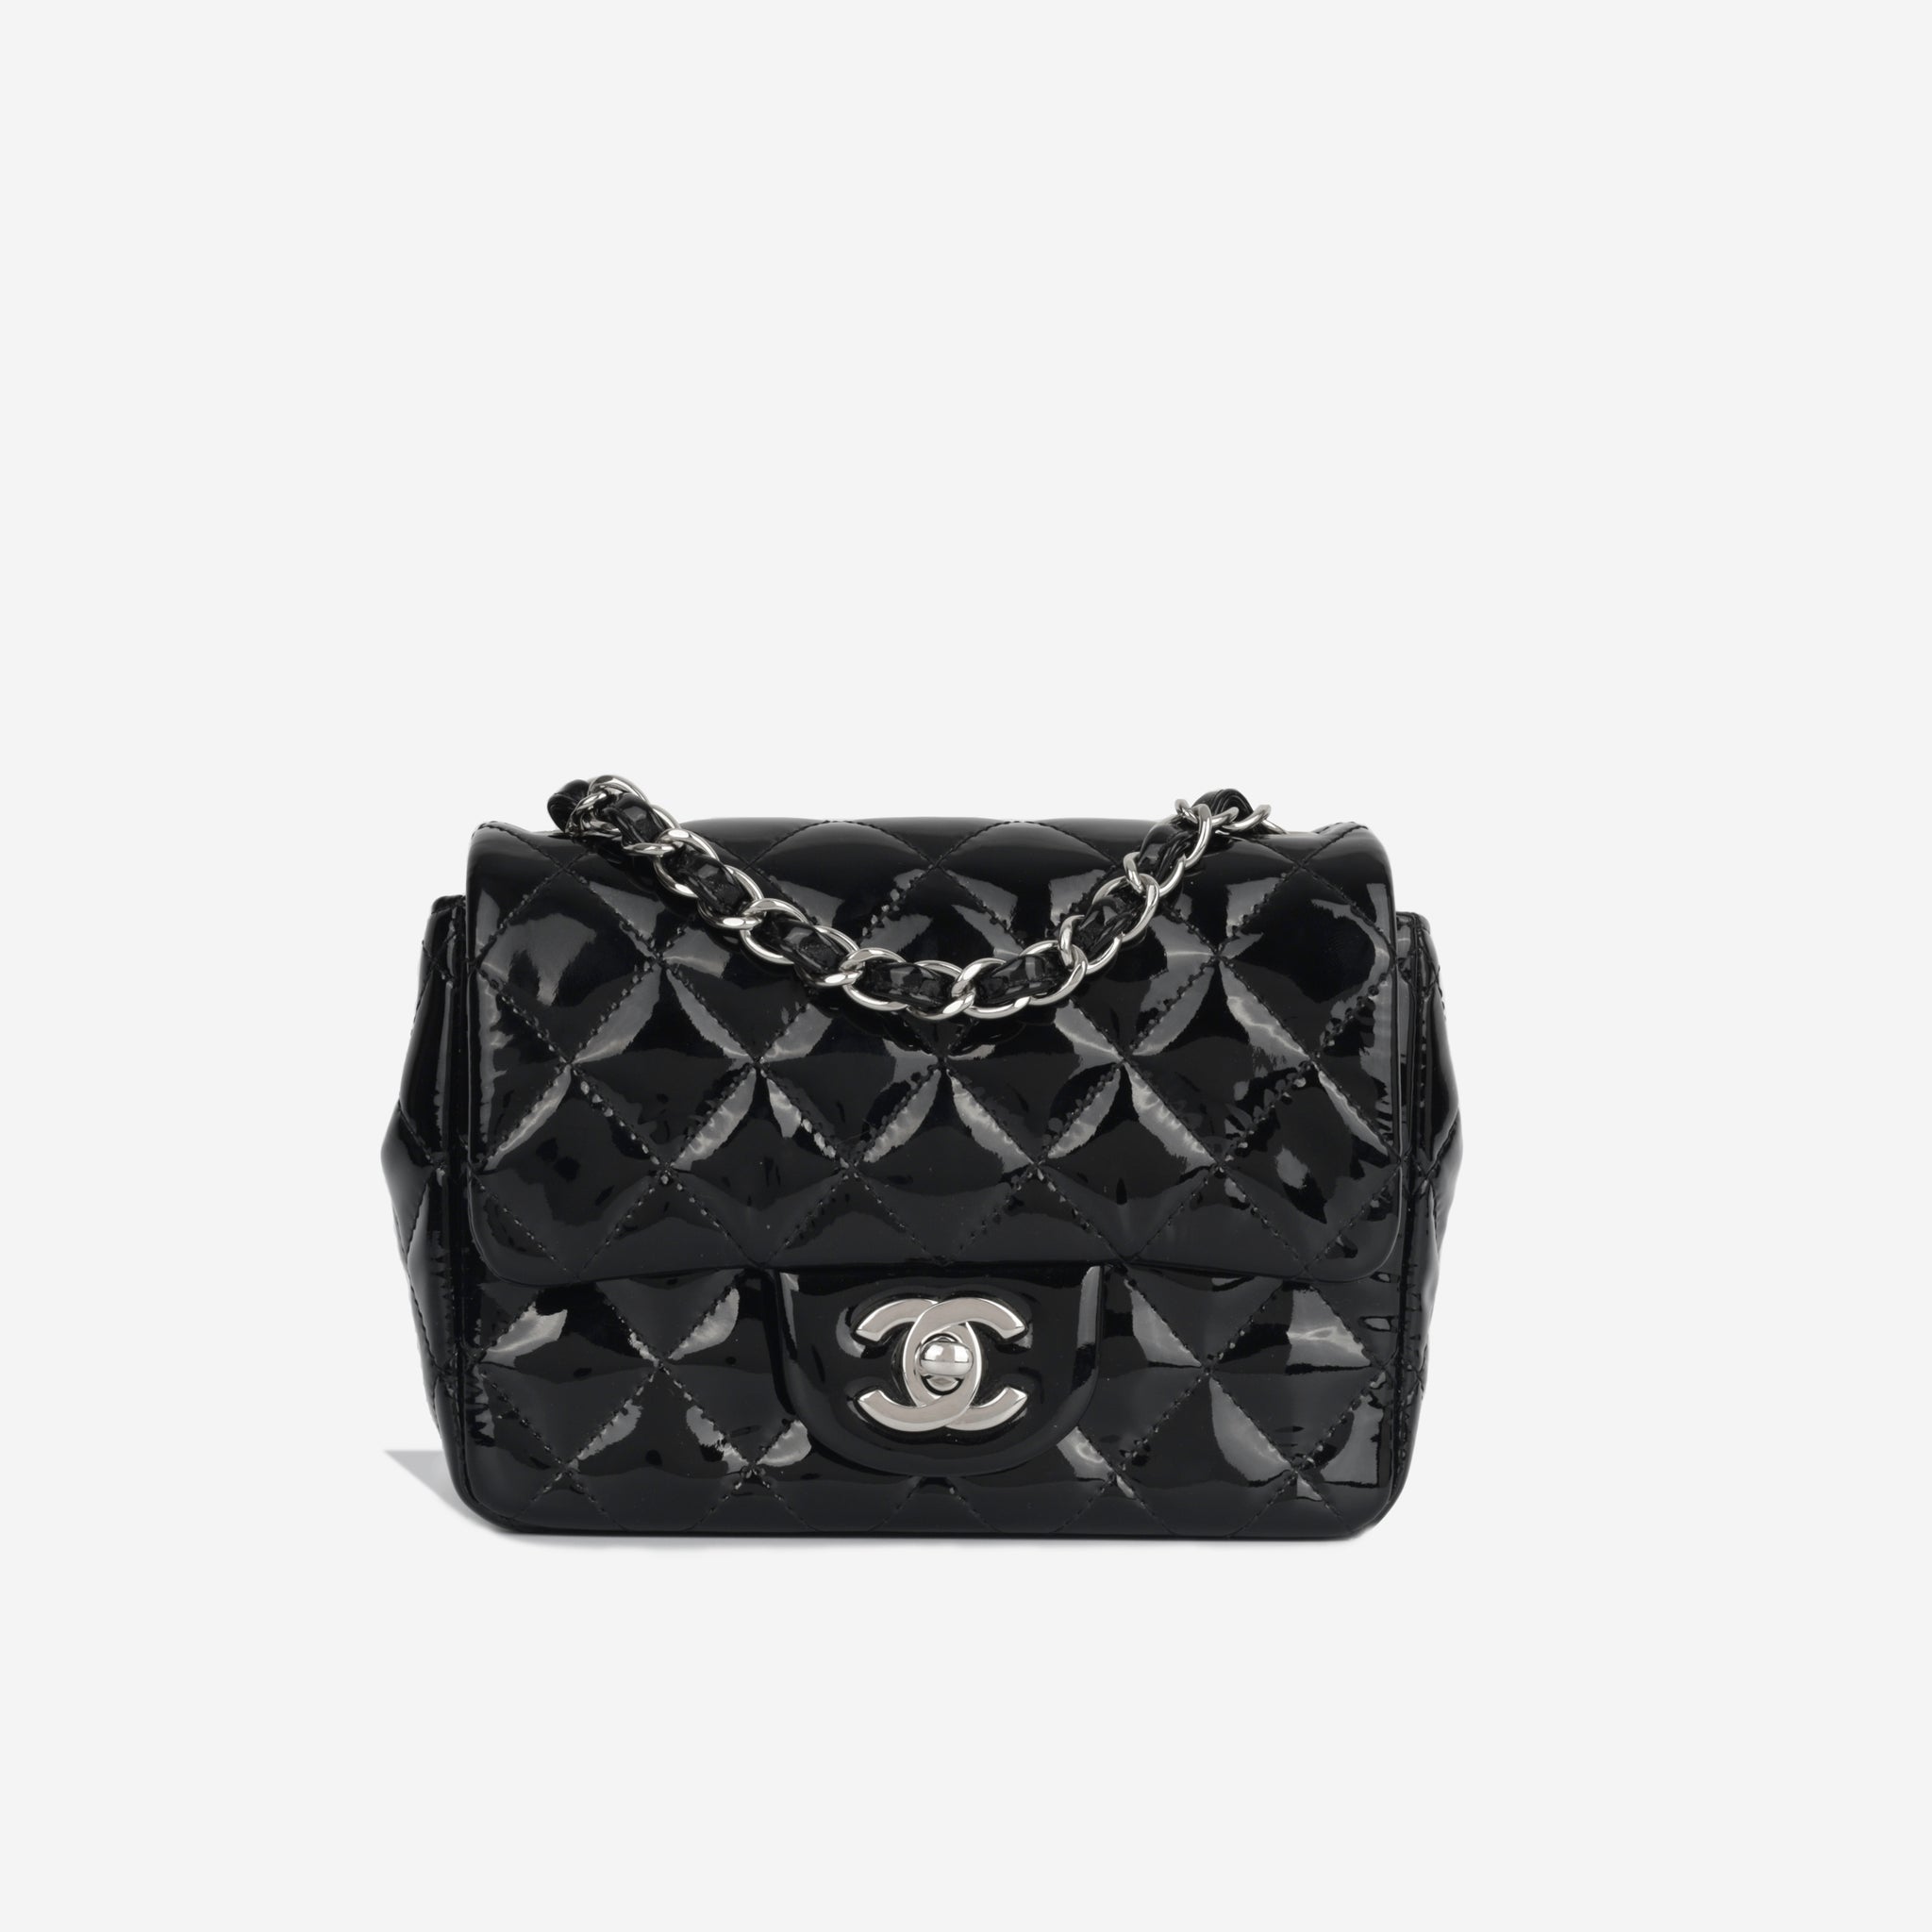 CHANEL Pre-Owned 1995 diamond-quilted Square Flap Shoulder Bag